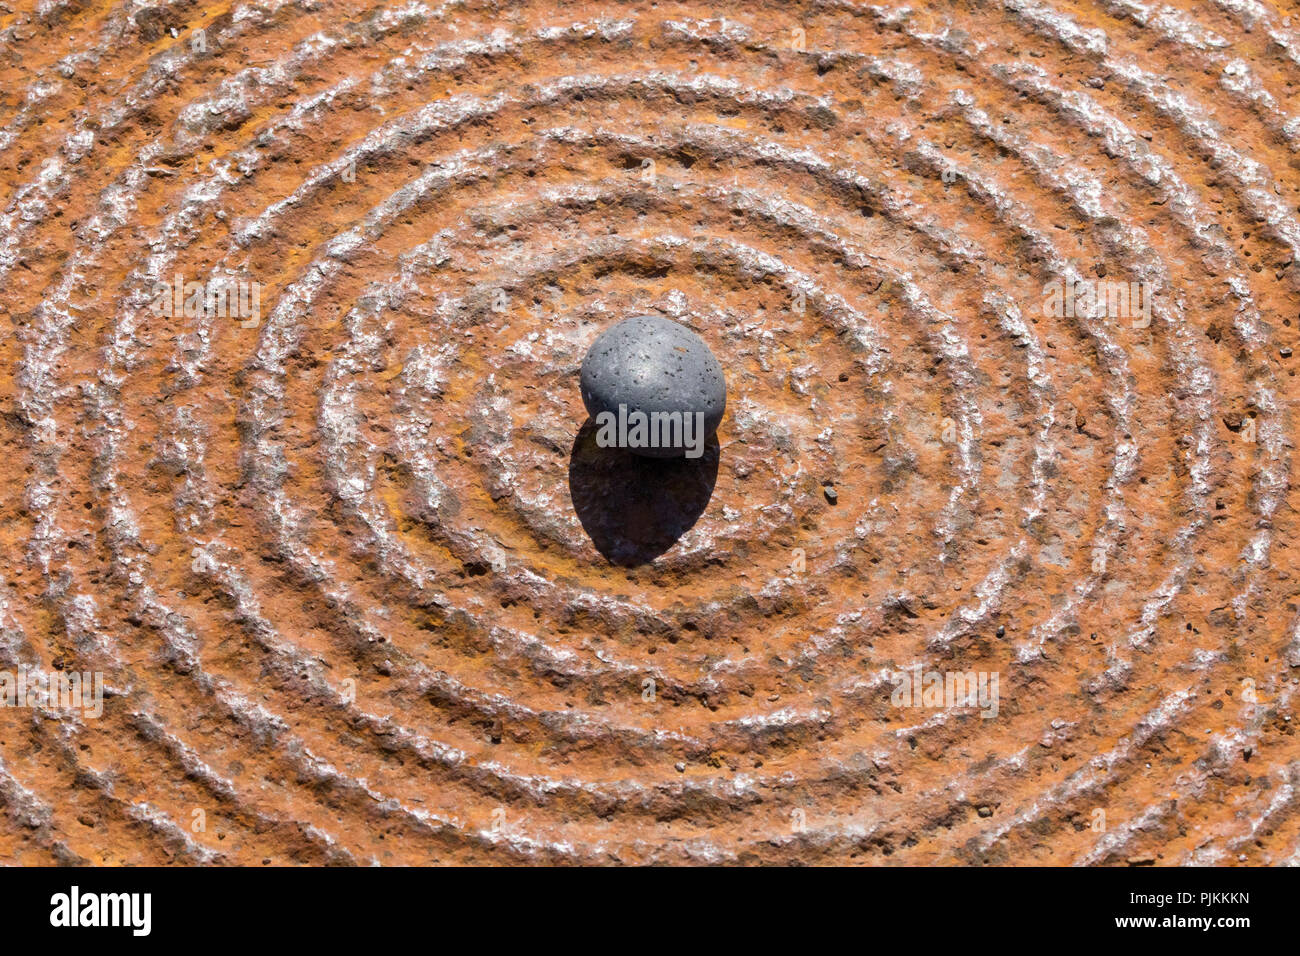 black stone on concentric circles, iron plate, Stock Photo